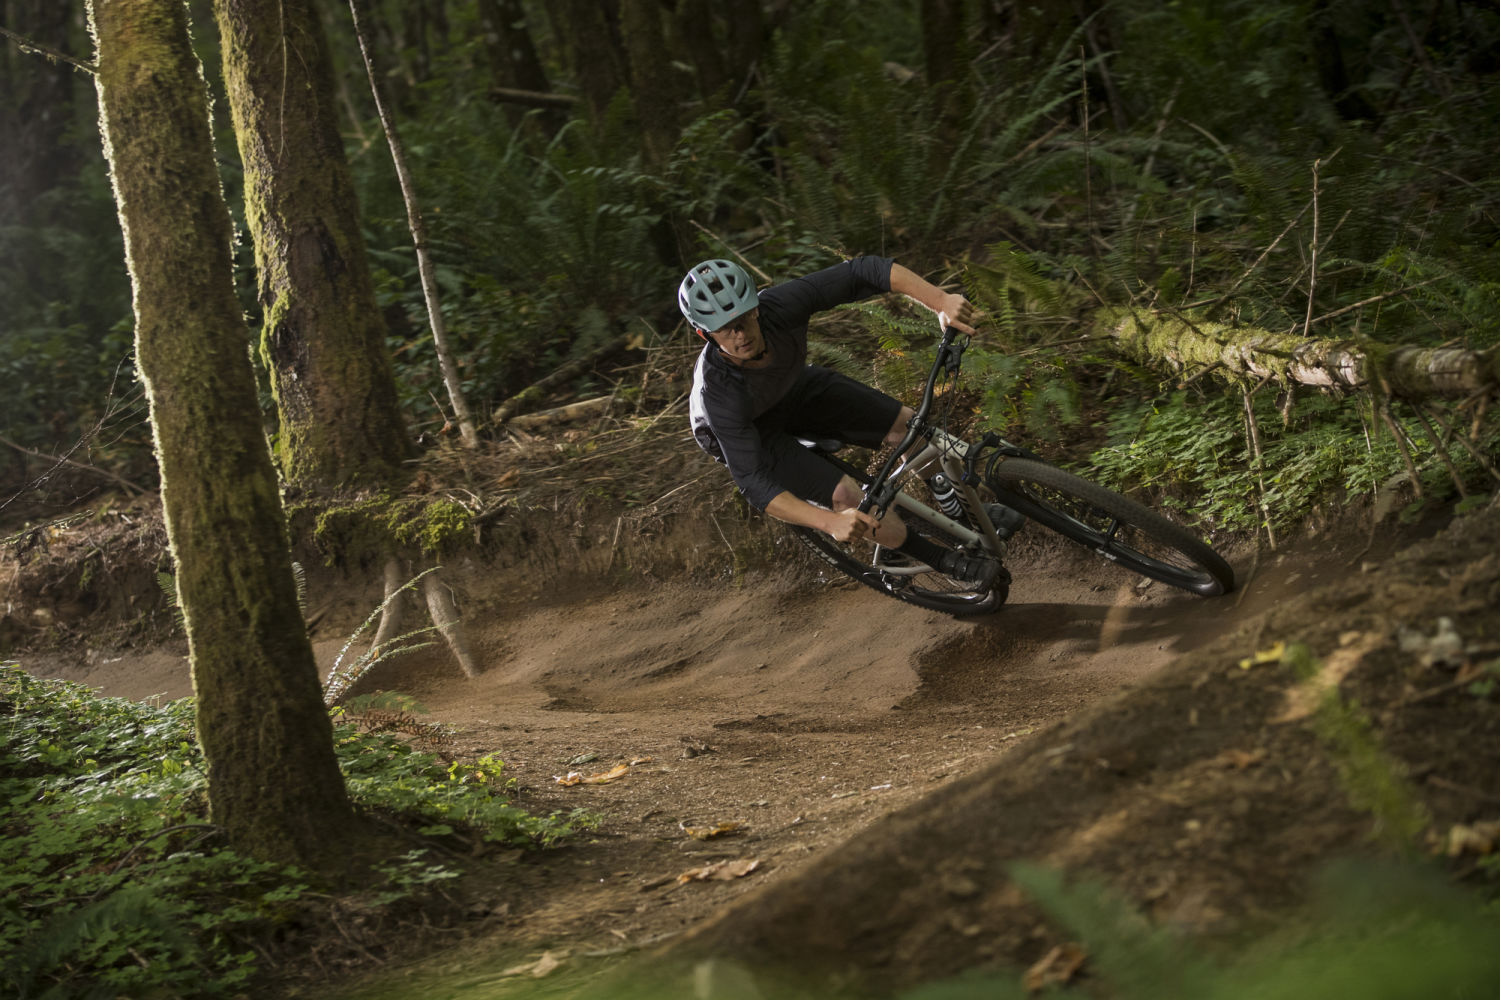 4 tips for riding on different surfaces and terrains